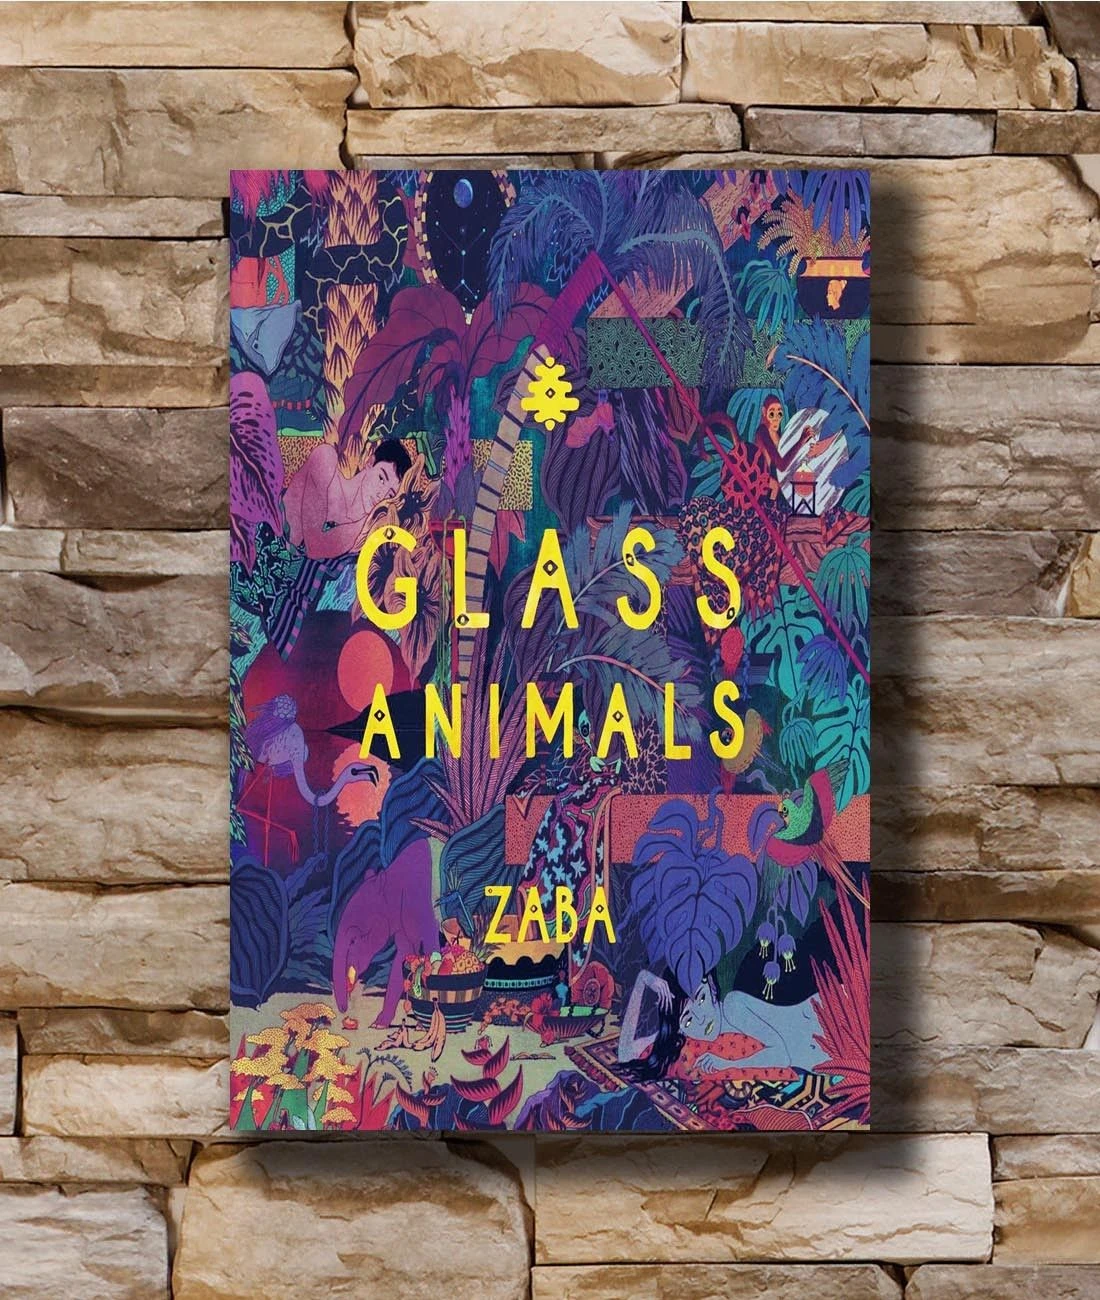 Q0415 Posters and Prints Glass Animals Zaba Indie England Rock Music Band  20x30 24x36In Art Poster Canvas Painting Home Decor|Painting & Calligraphy|  - AliExpress